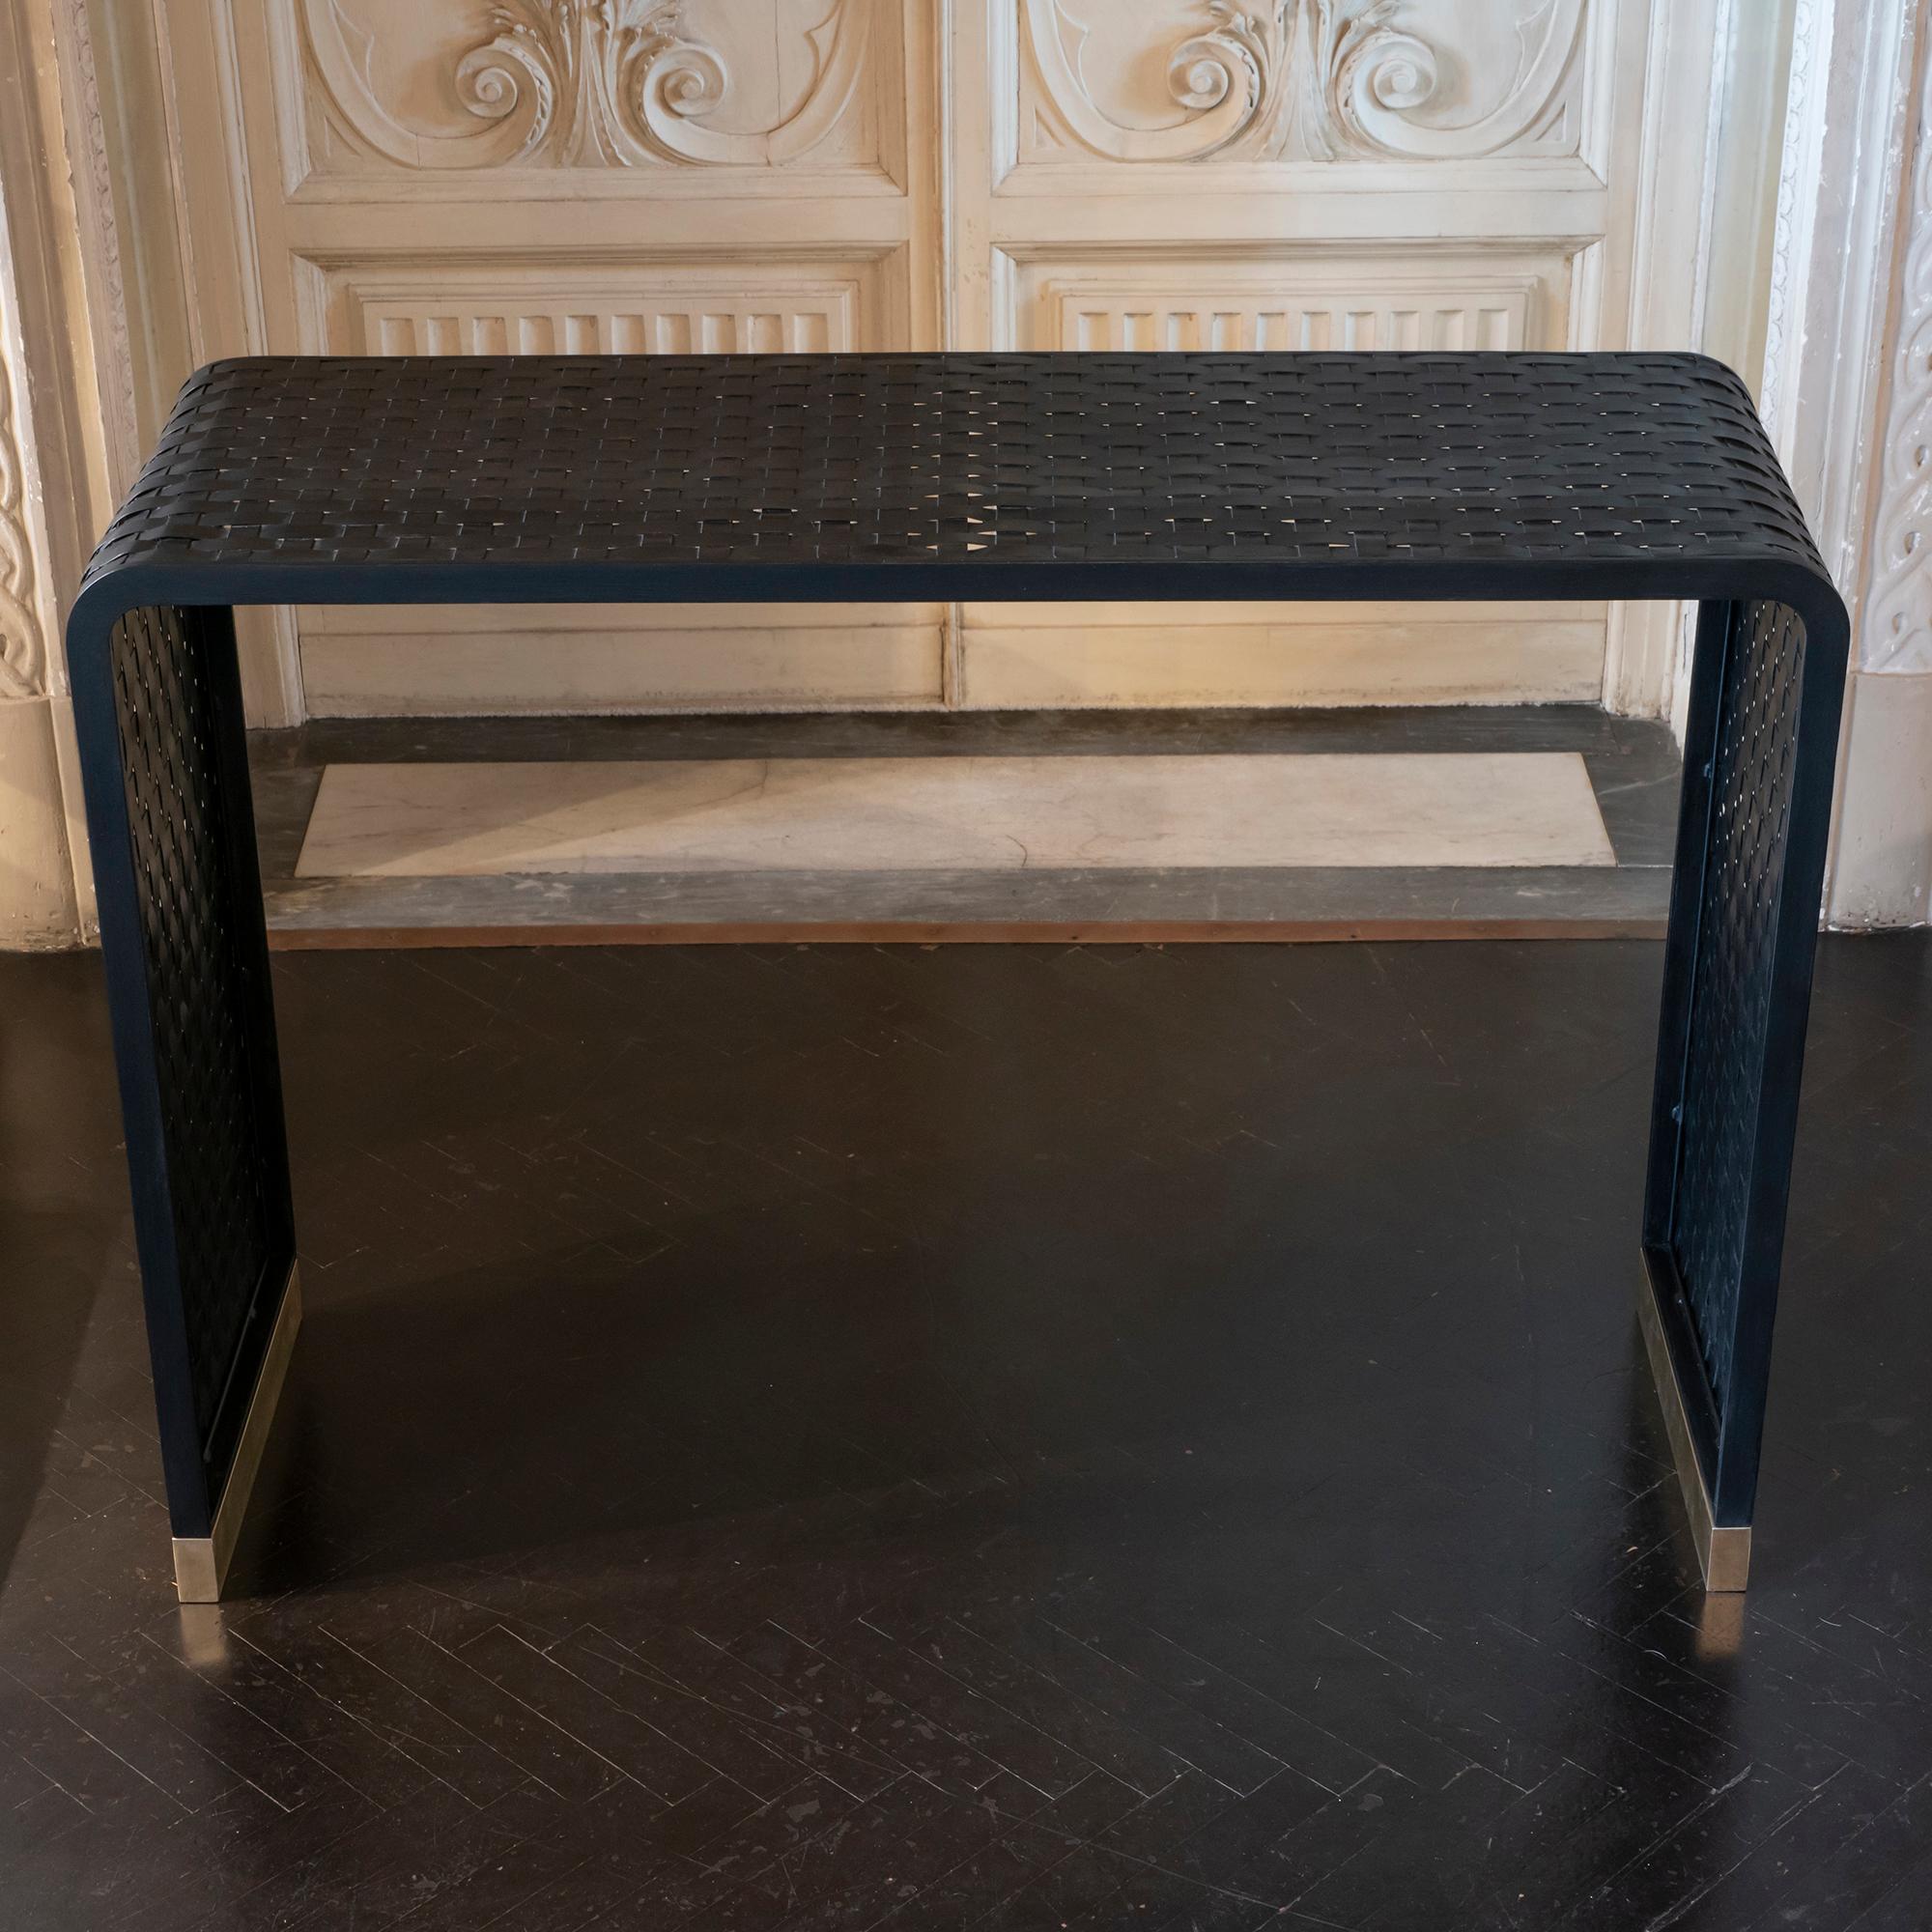 Hand-Woven Flair Edition “Intreccio” Console In Black Steel and Natural Brass, Italy, 2022 For Sale